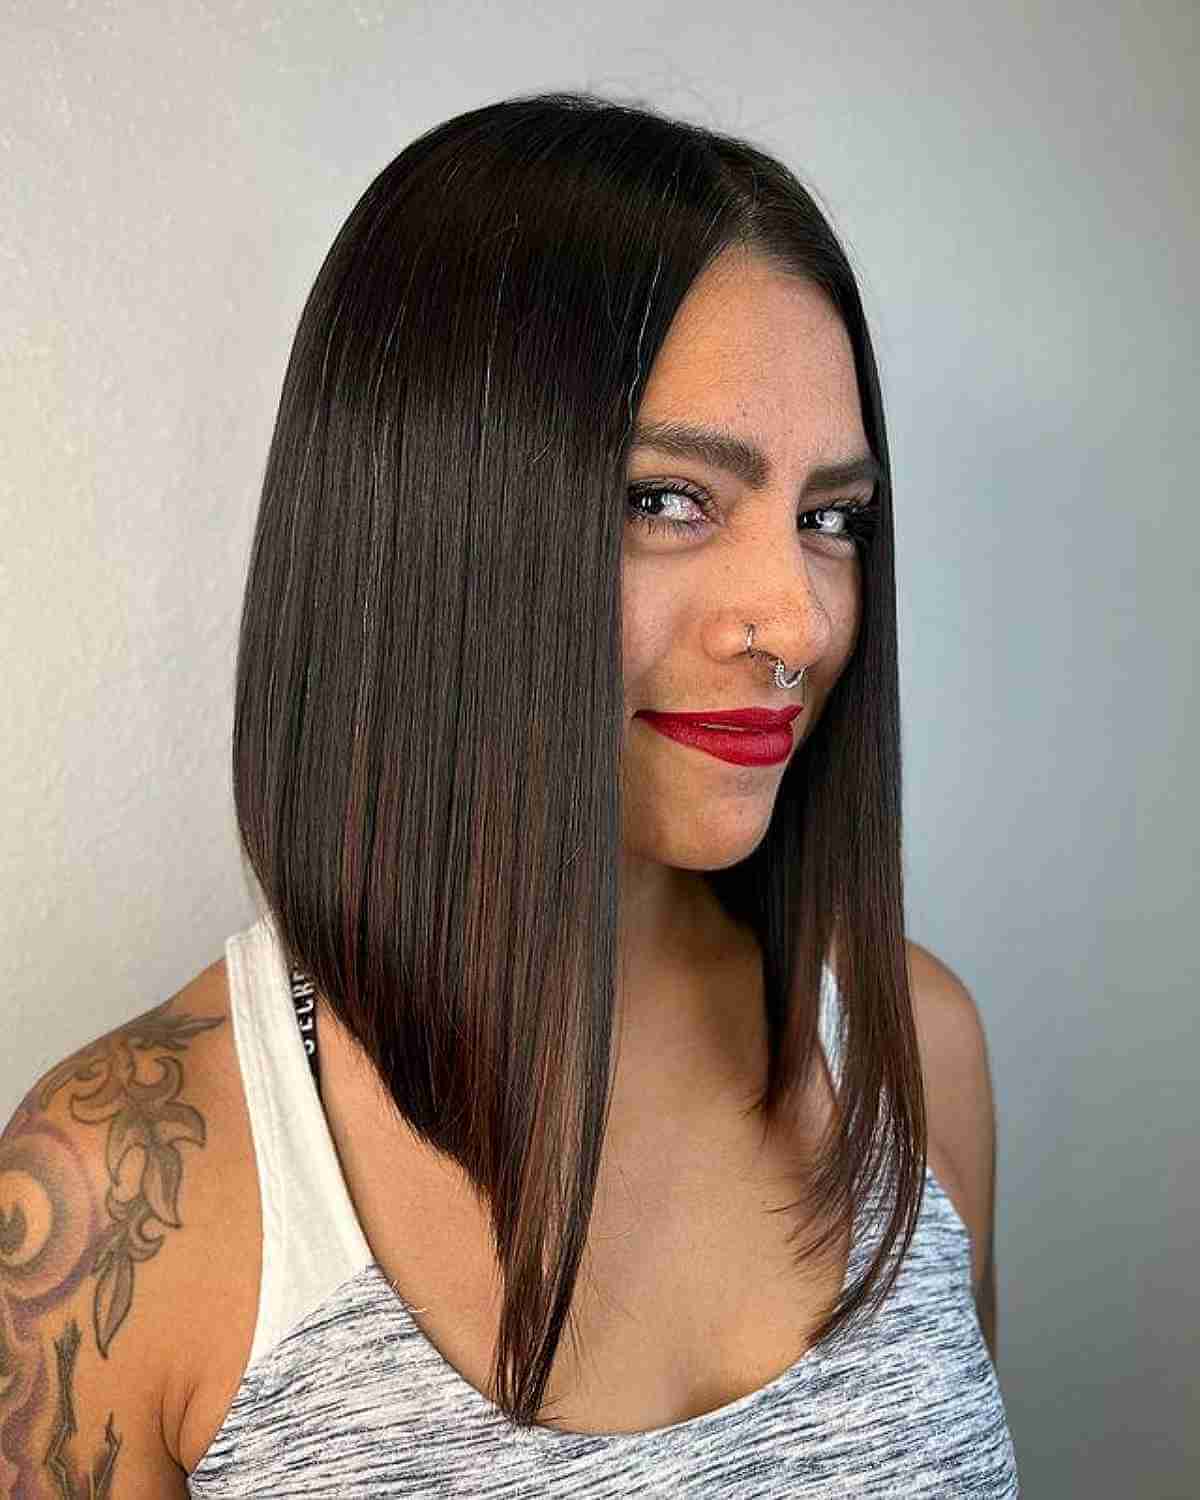 Sleek and Modern: Mid-Length Inverted Bob with Center Part